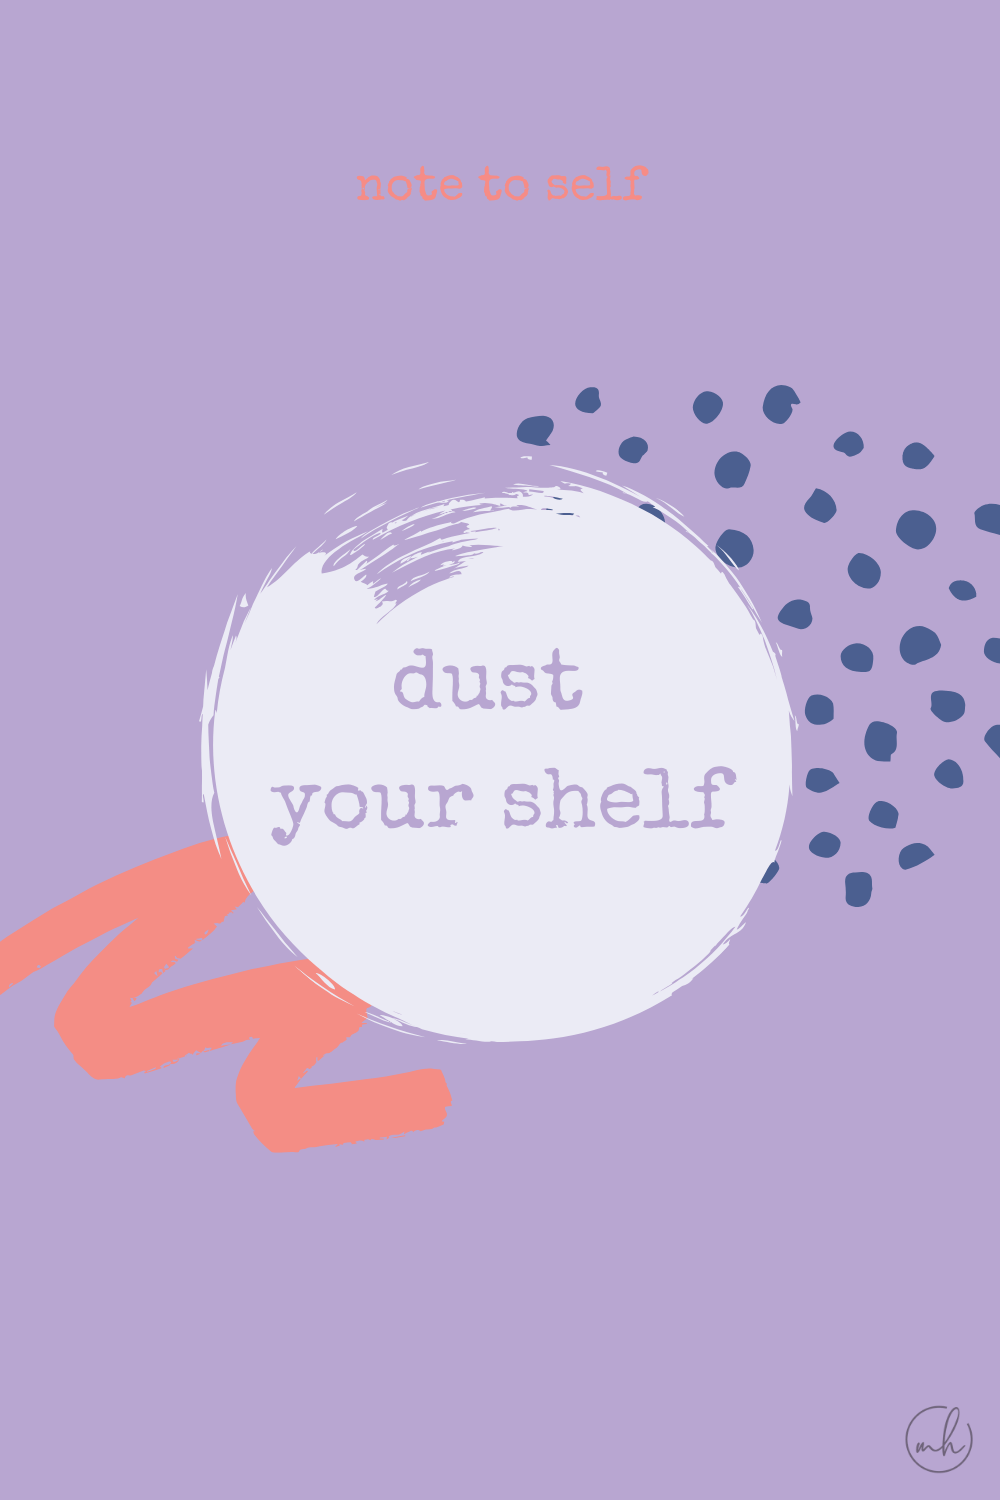 Dust your shelf - Note to self quotes | myhoogah